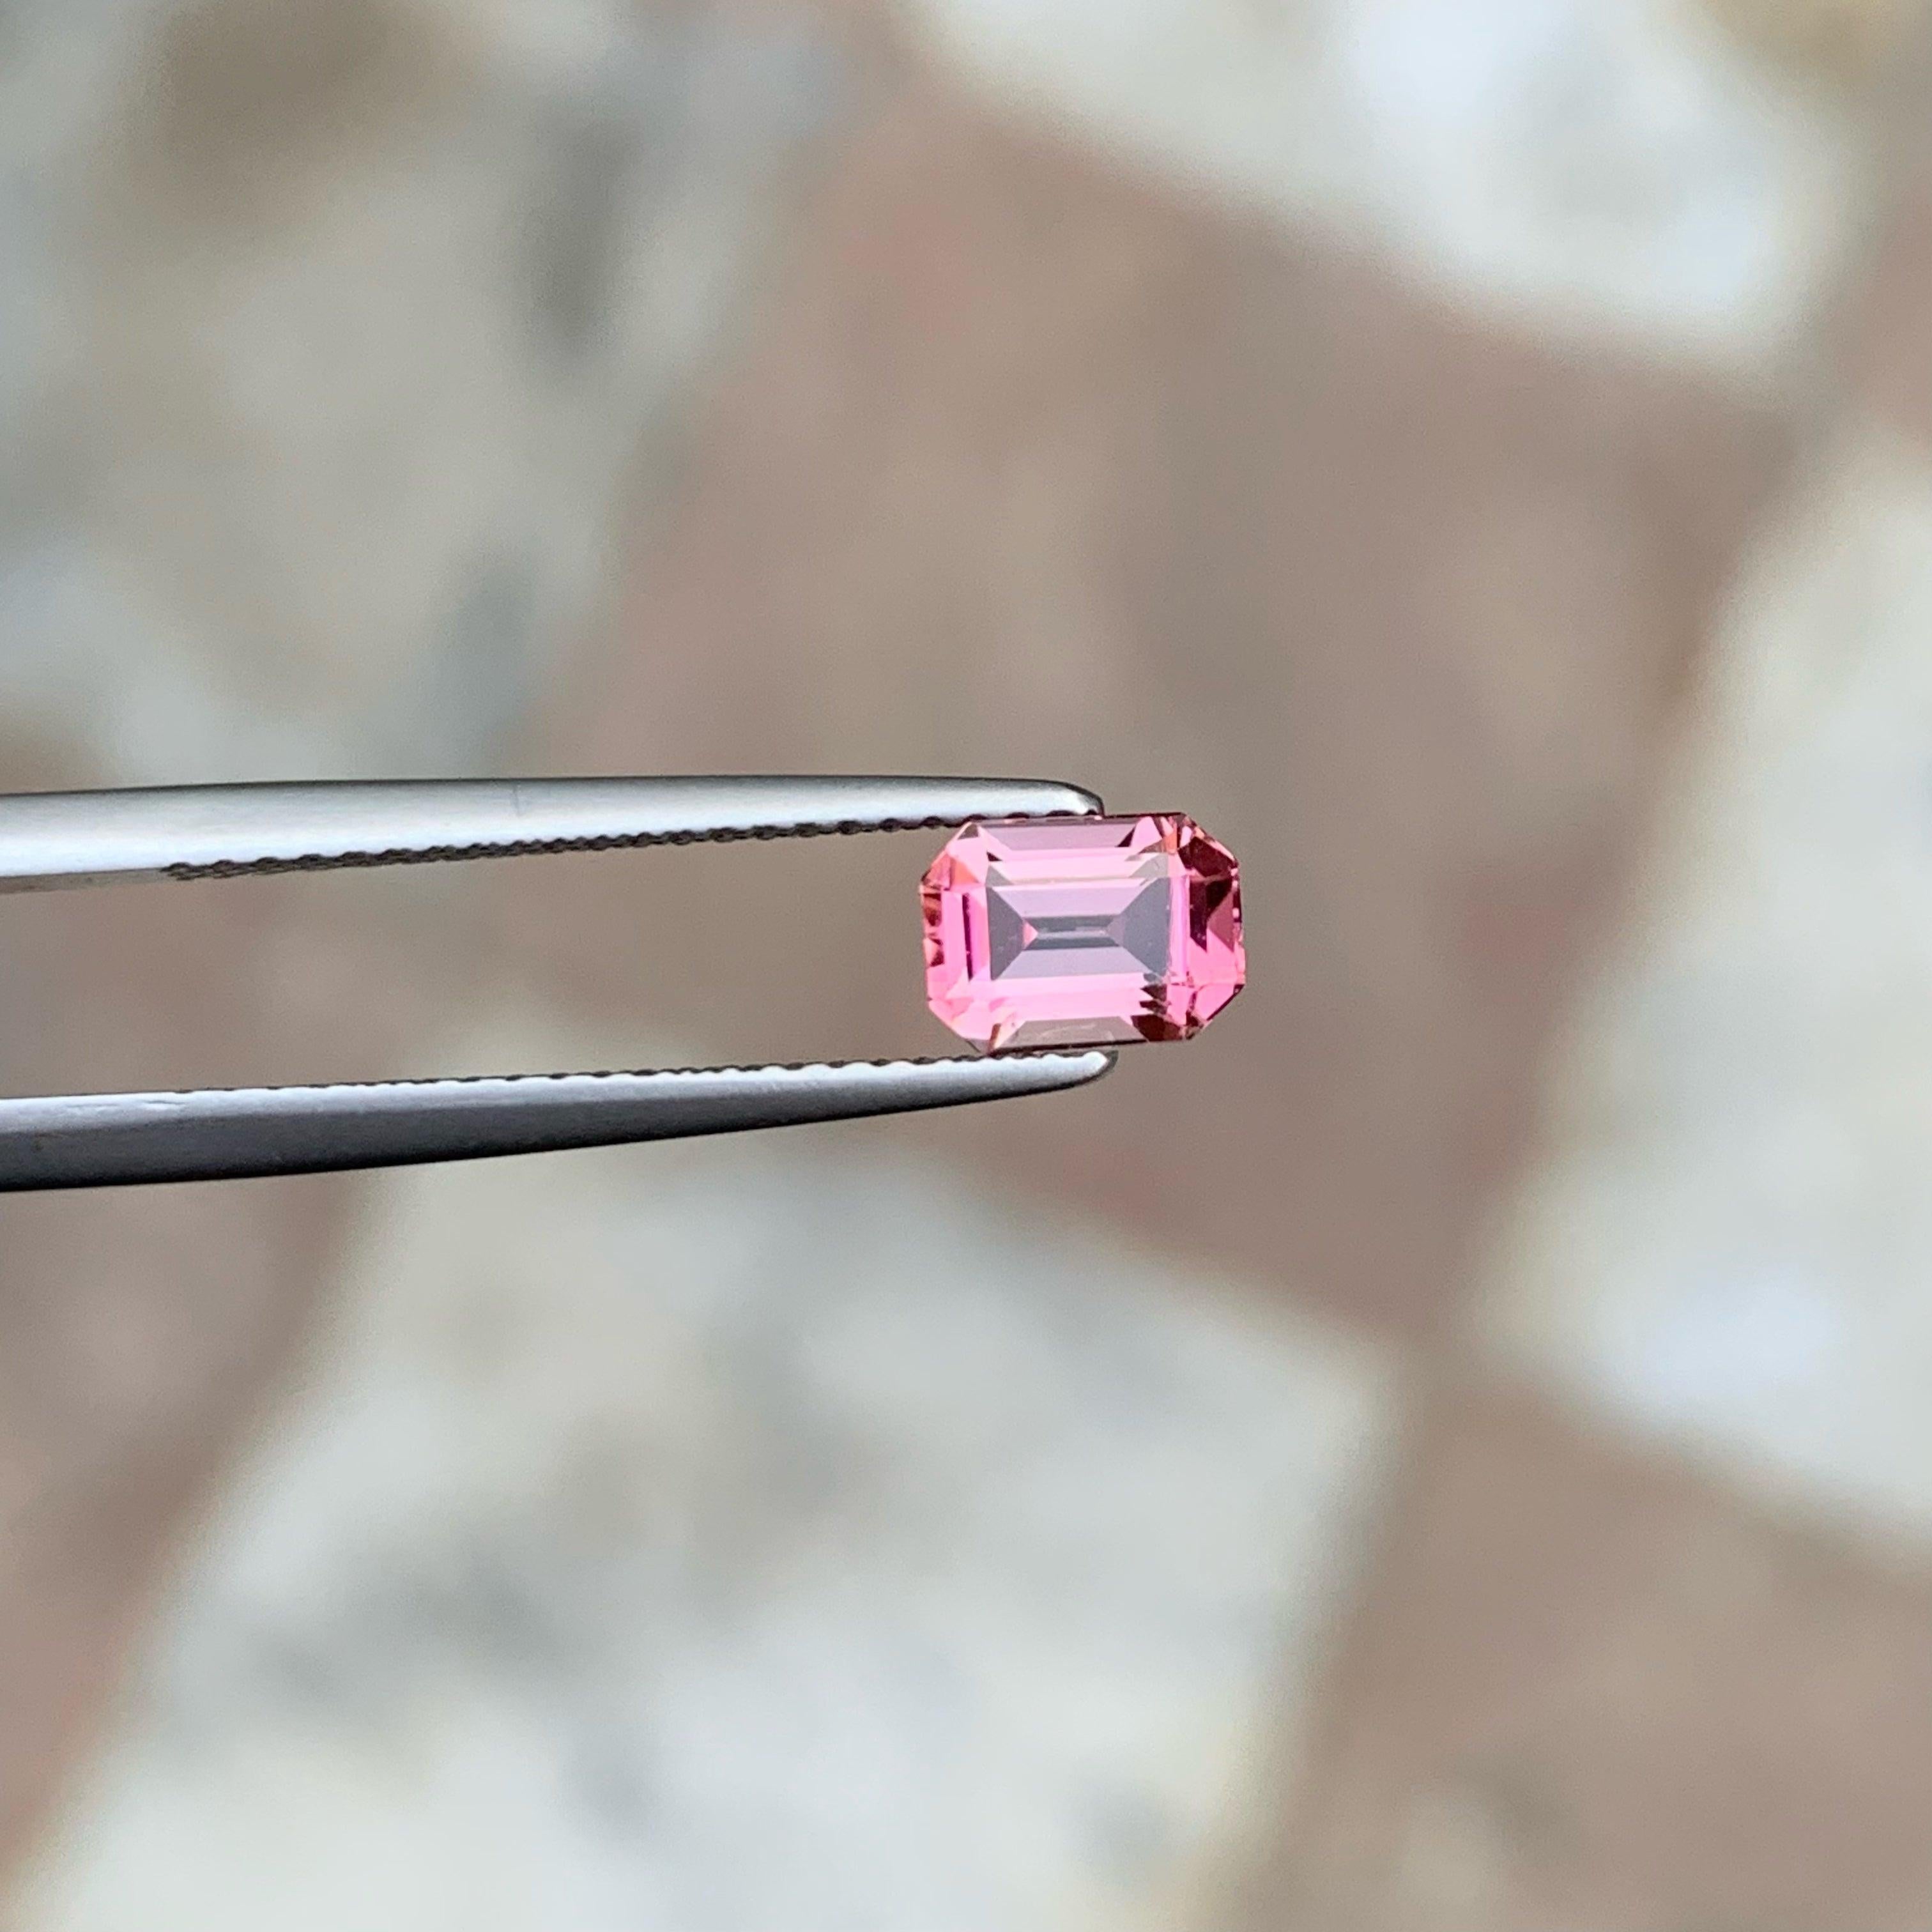 Natural Sweet Baby Pink Tourmaline, available For Sale At Wholesale Price Natural High Quality 1.10 Carats Eye Clean Clarity Octagon Shape From Afghanistan.

Product Information
GEMSTONE TYPE:	Natural Sweet Baby Pink Tourmaline
WEIGHT:	1.10